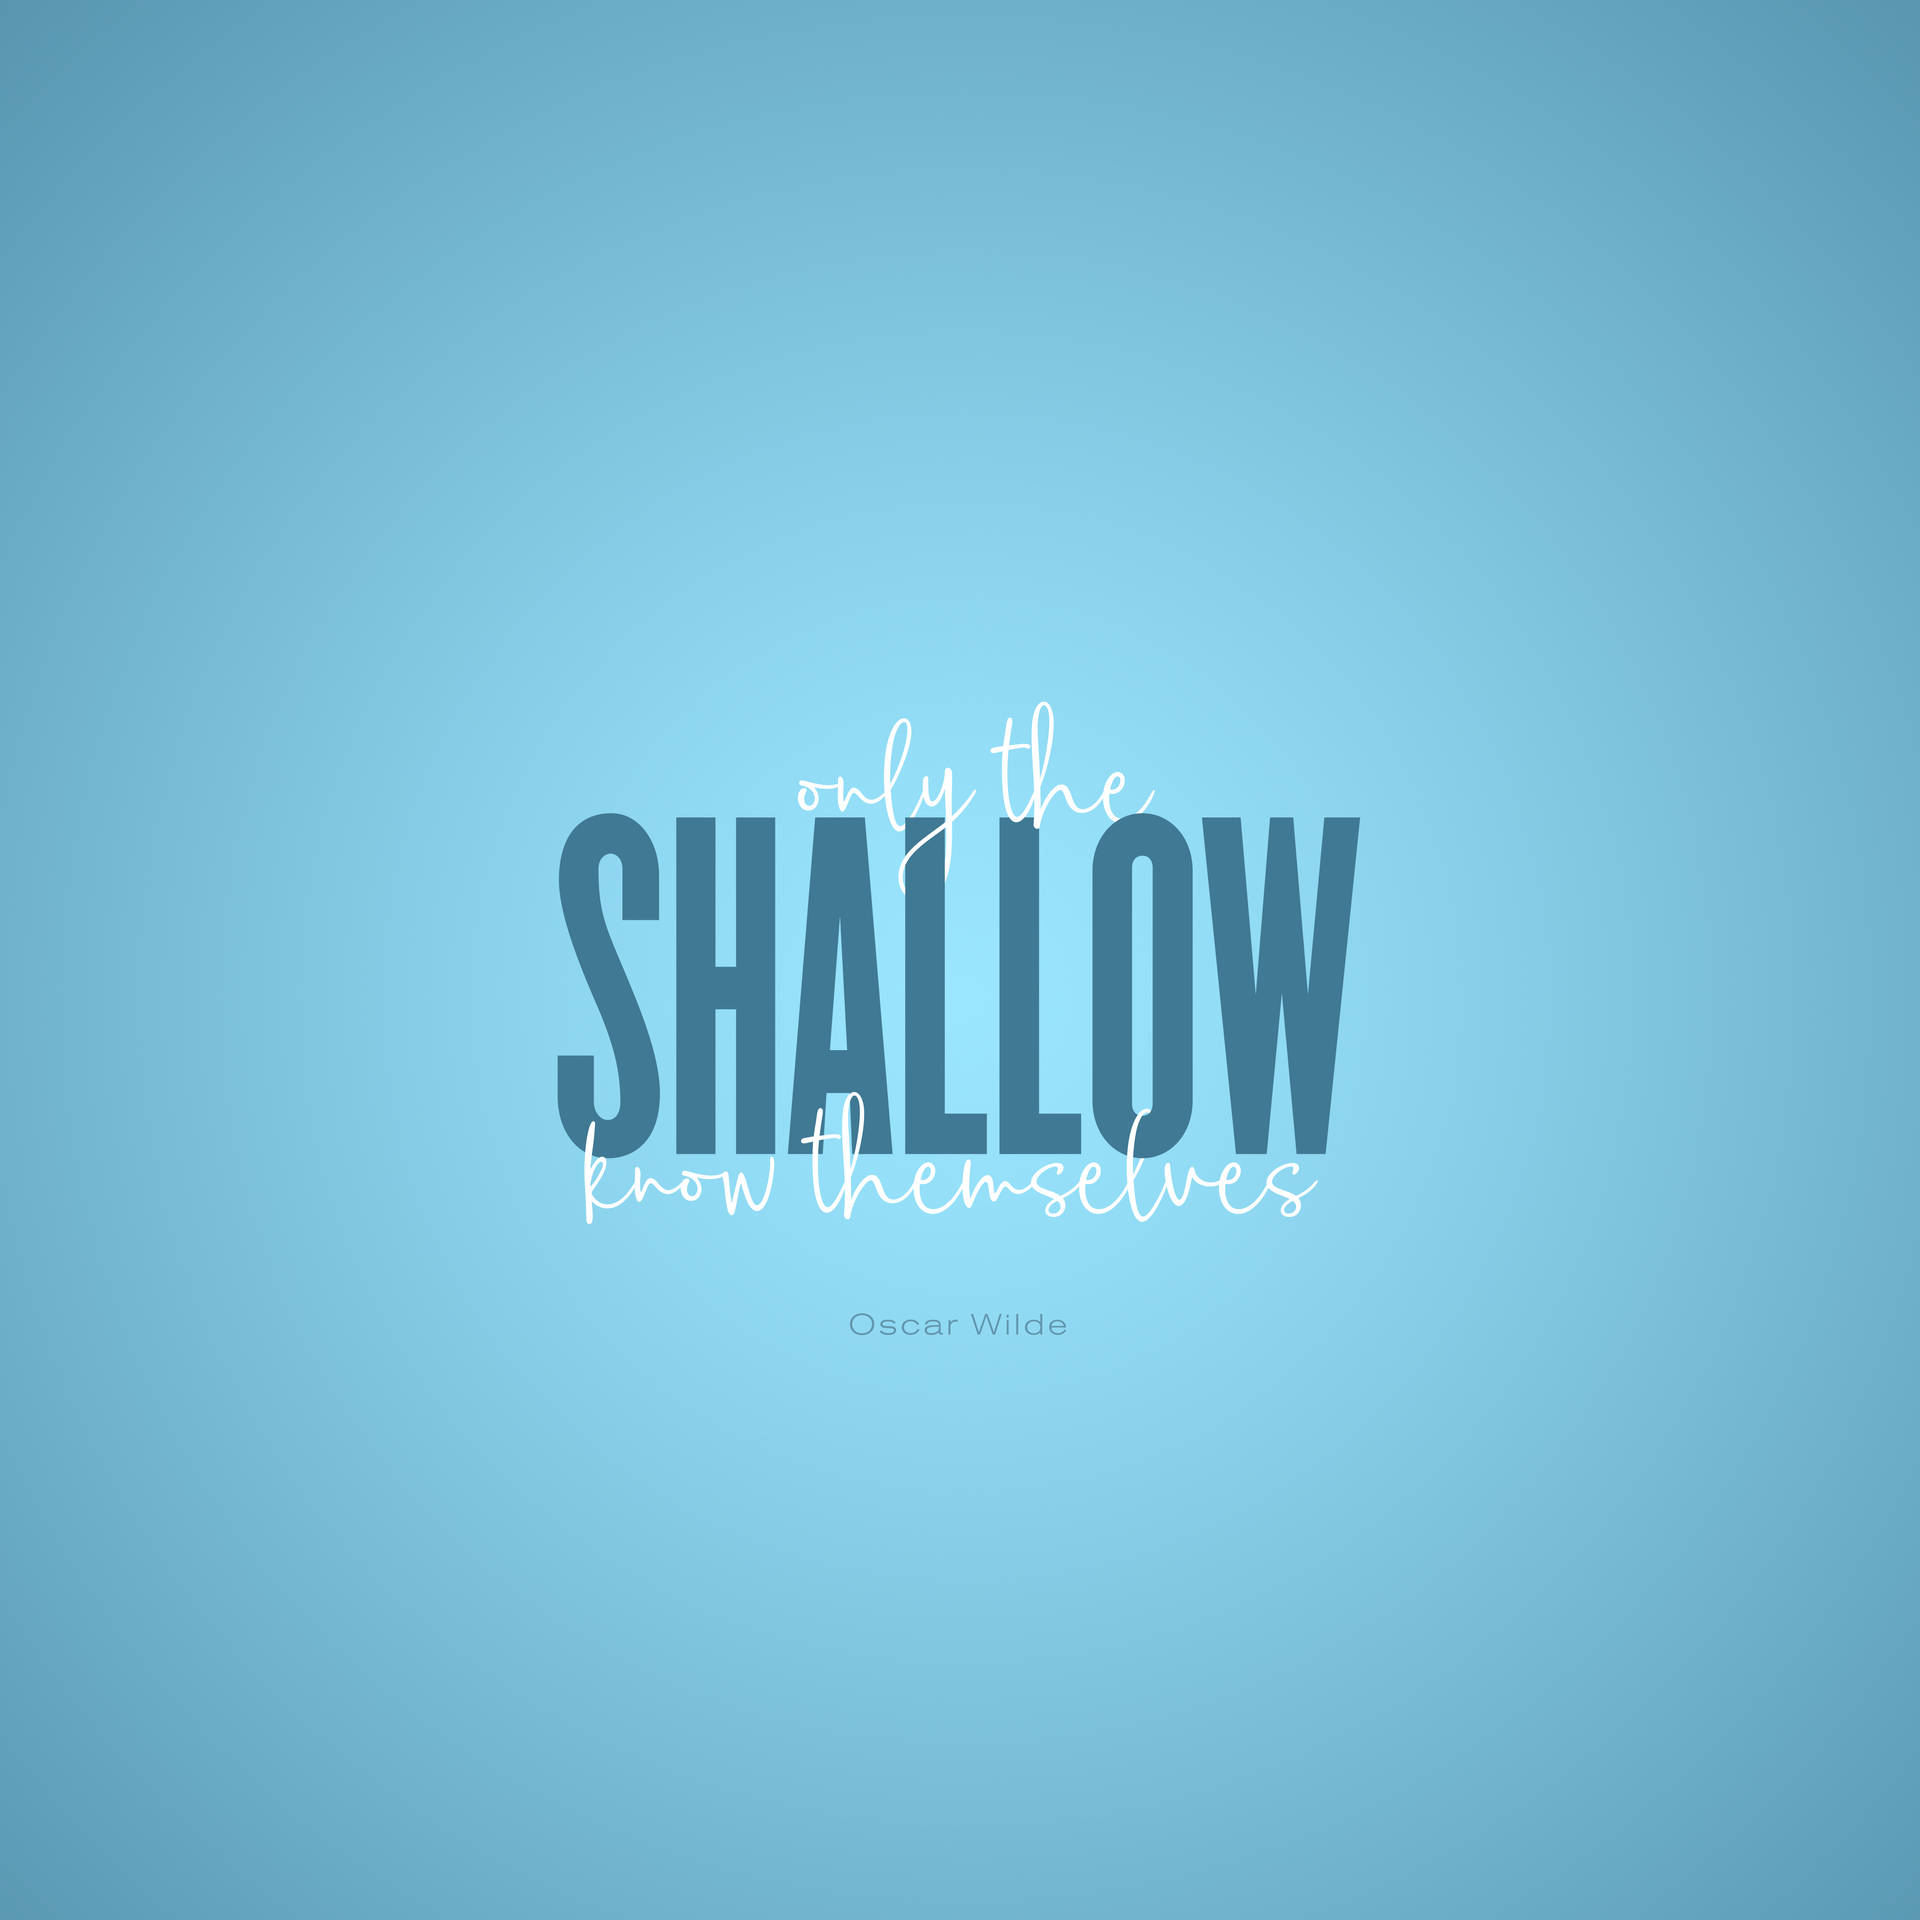 Shallow Words Quotes Wallpaper